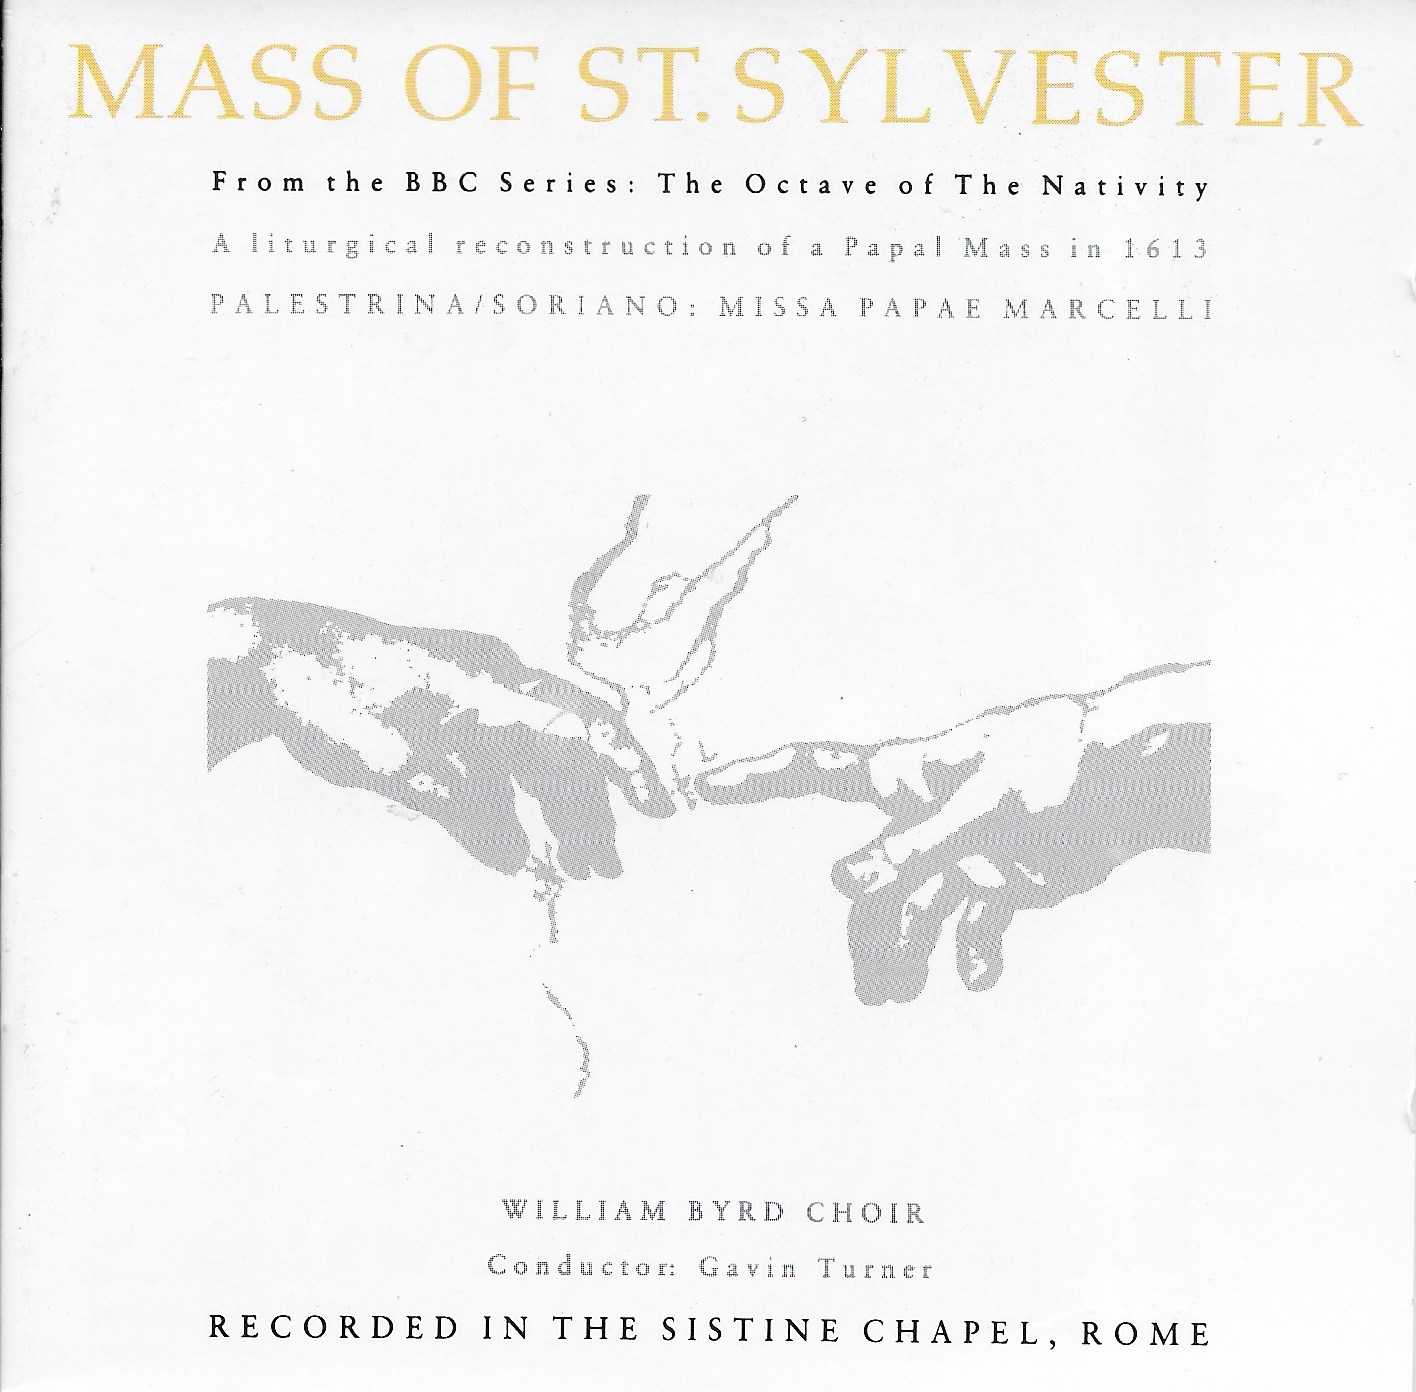 Picture of Mass of St. Sylvester by artist Various from the BBC cds - Records and Tapes library